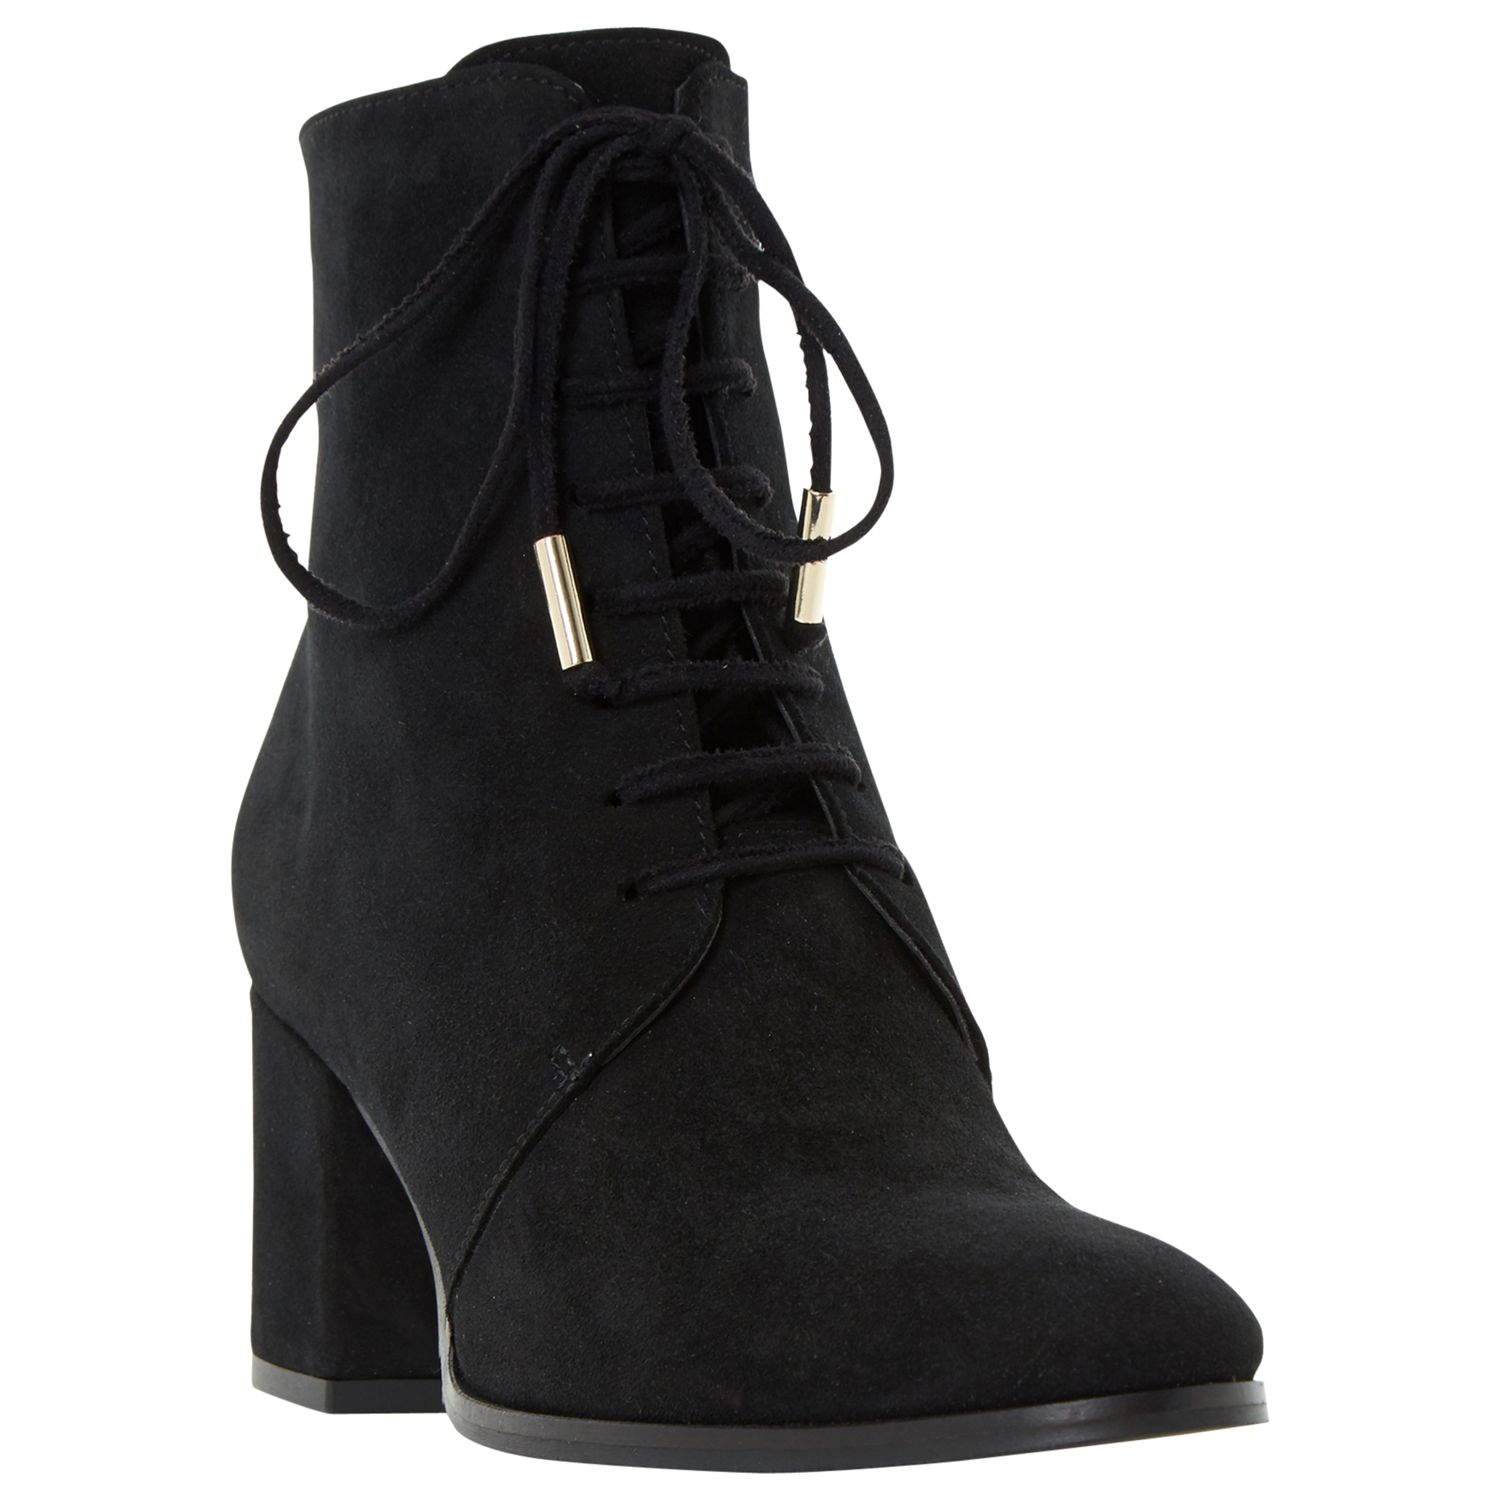 Dune Olita Lace Up Ankle Boots, Black, 3